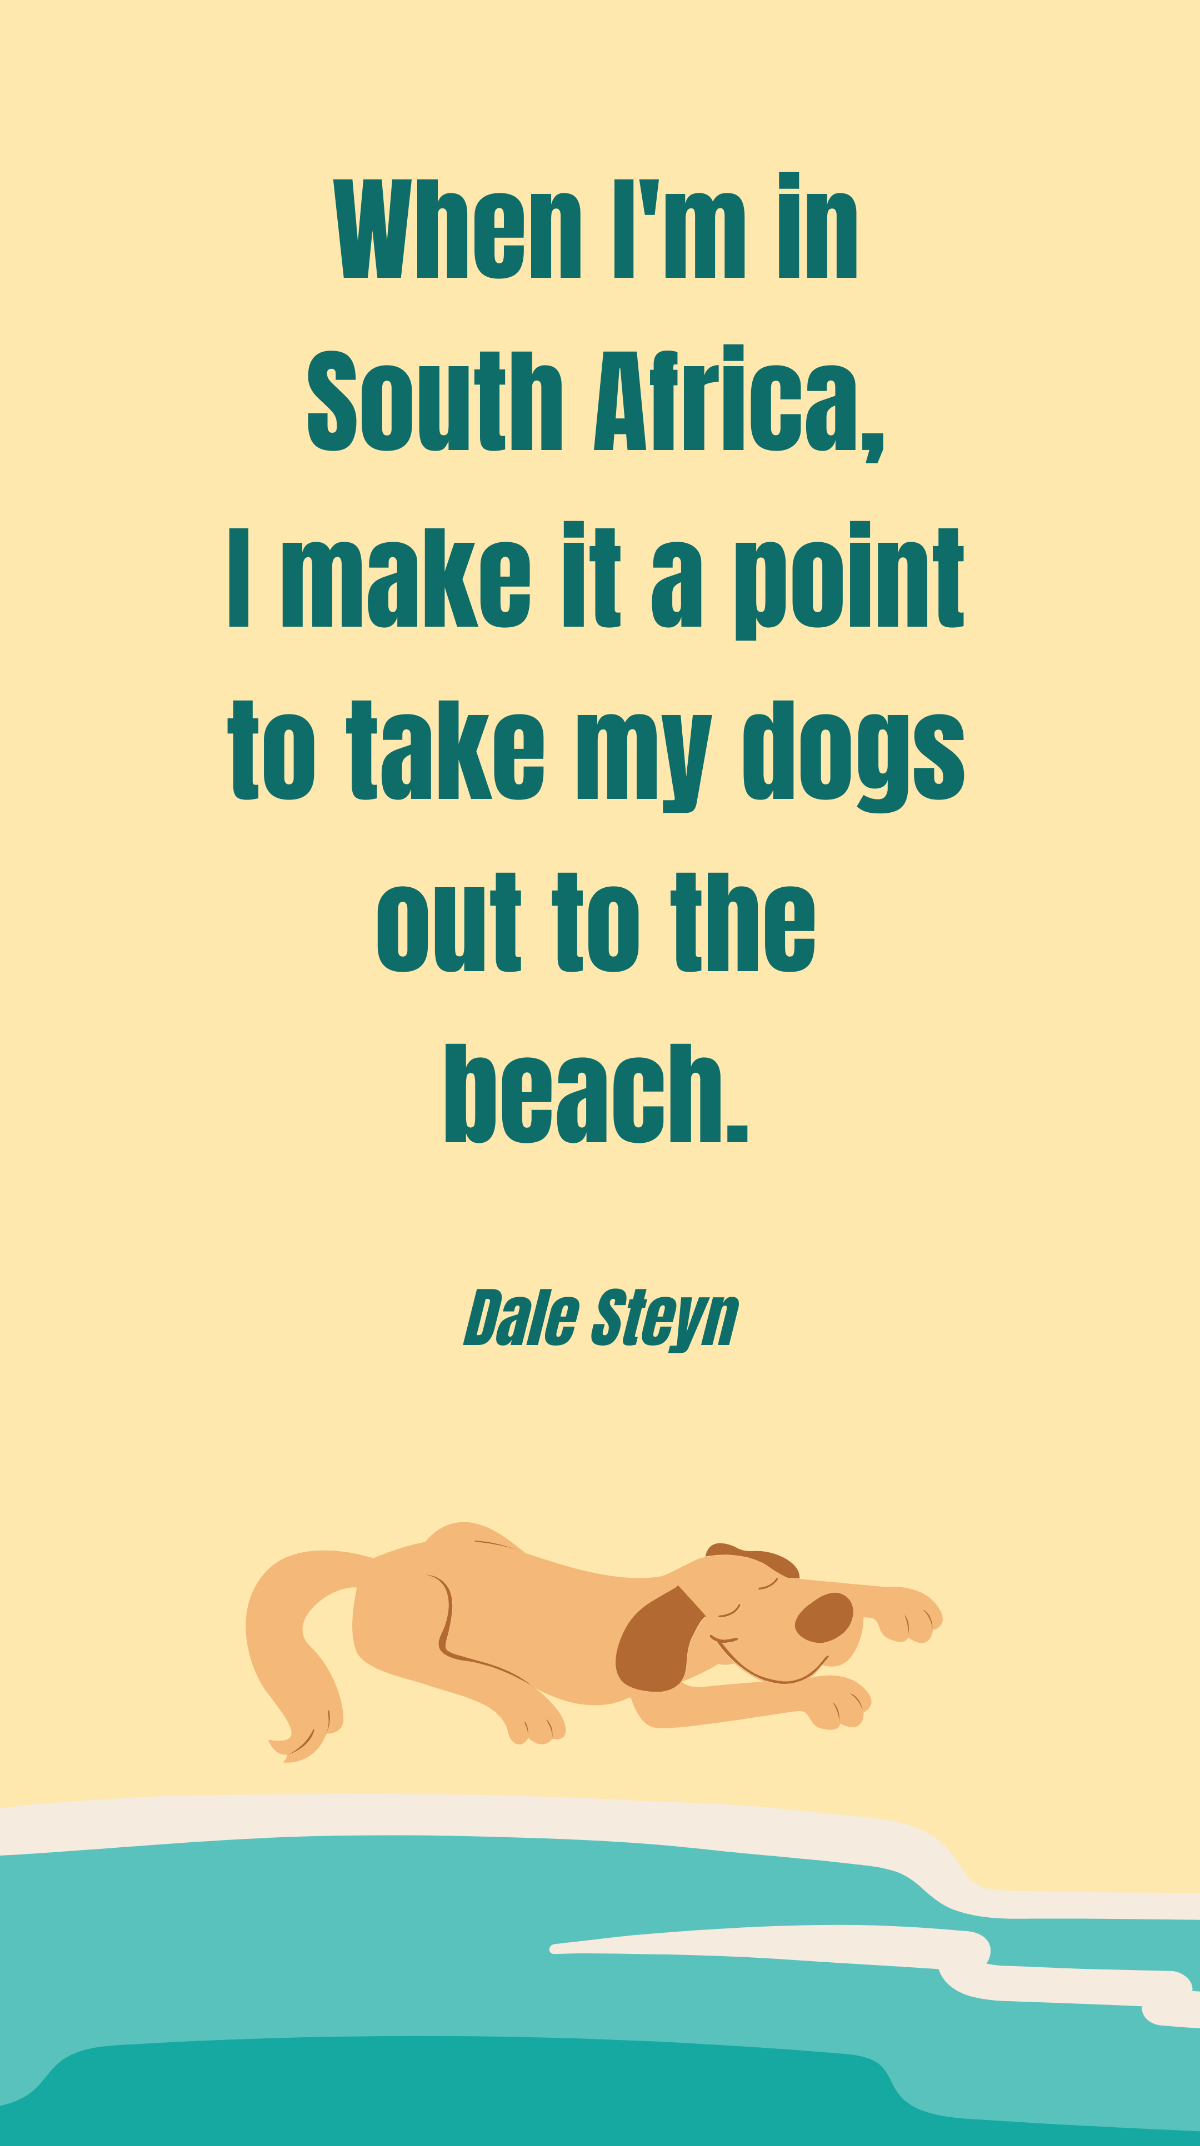 Dale Steyn - When I'm in South Africa, I make it a point to take my dogs out to the beach. Template